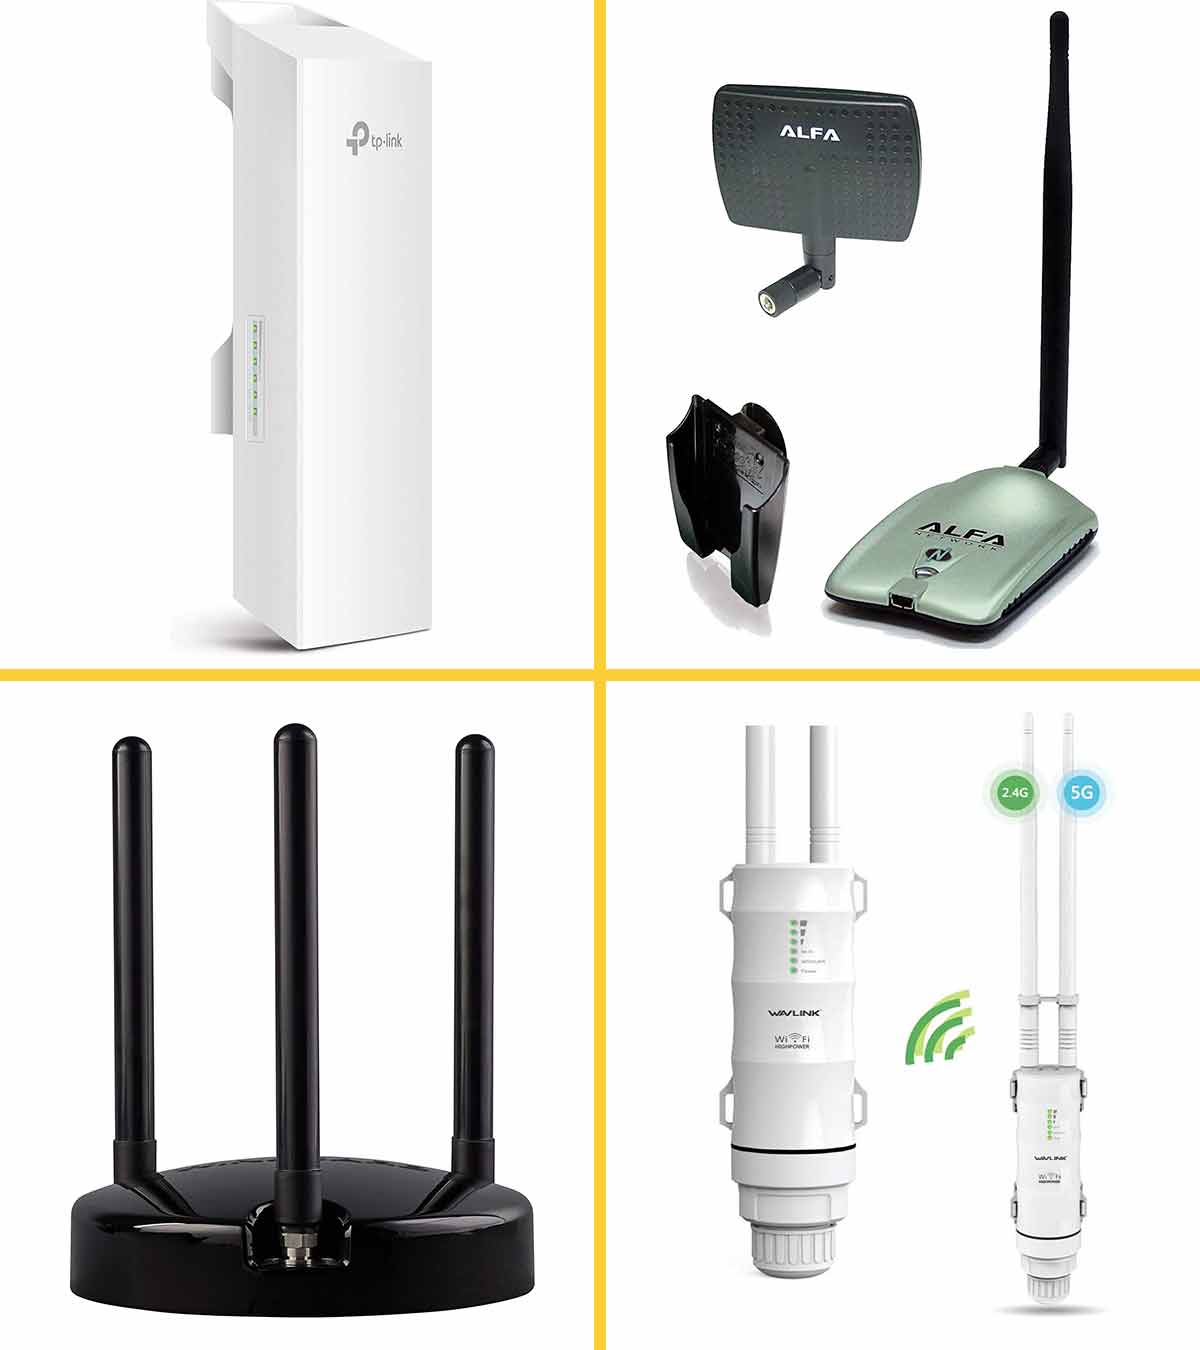 What is inside a Wifi Extender Or Repeater, 2 Gud Product